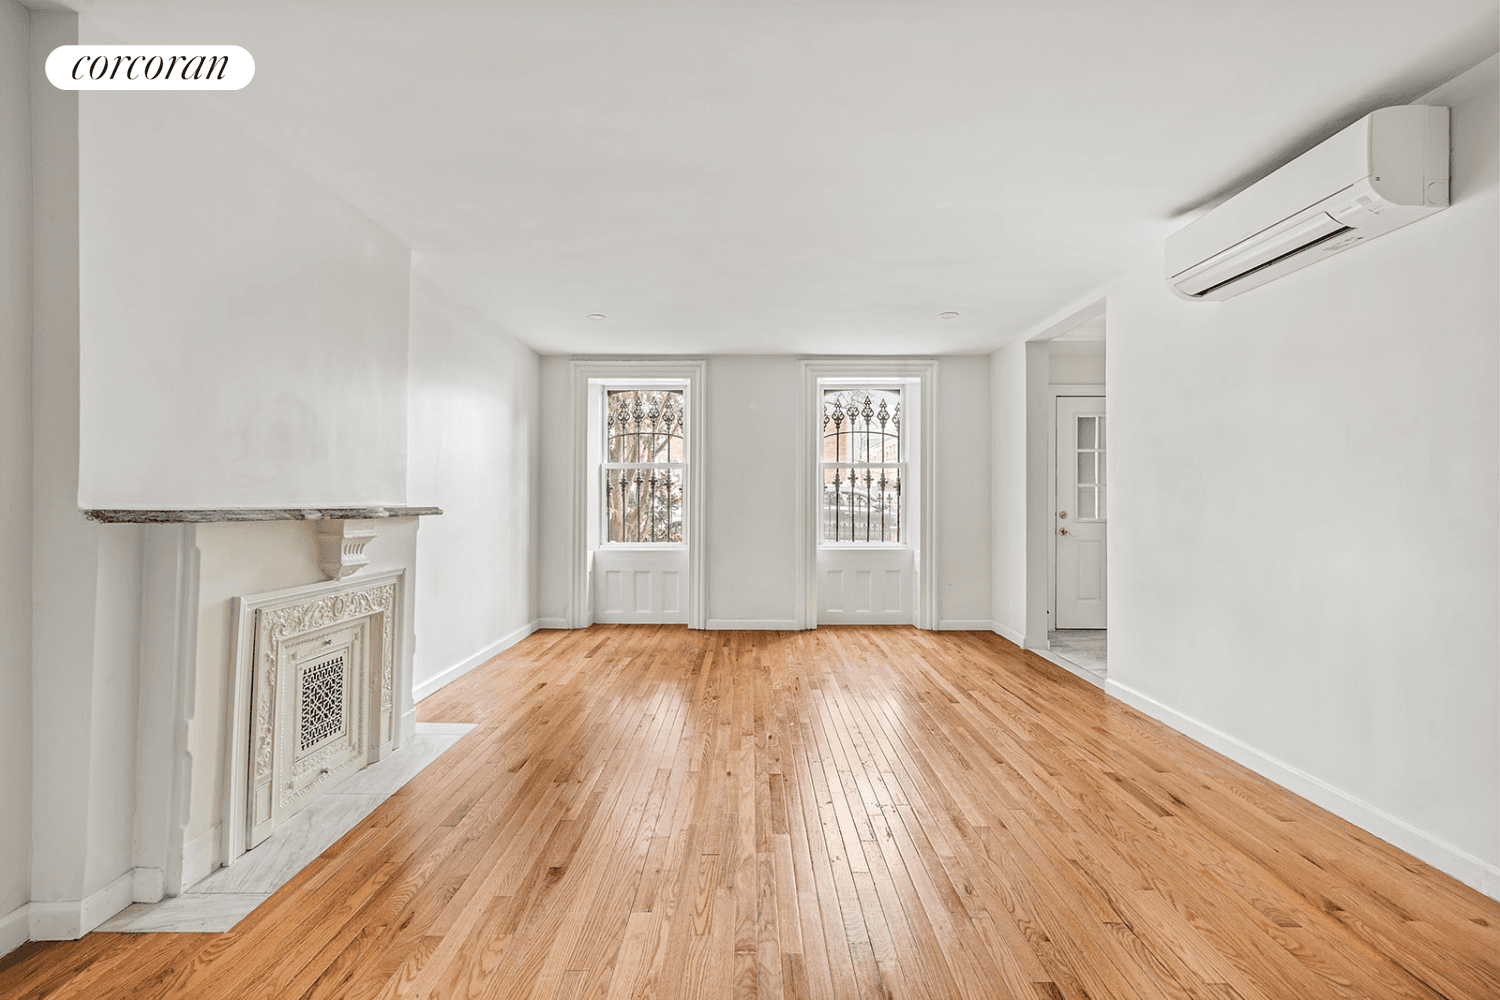 187 6th Ave, GardenStep into this beautiful recently renovated garden apartment and feel right at home in prime Park Slope.